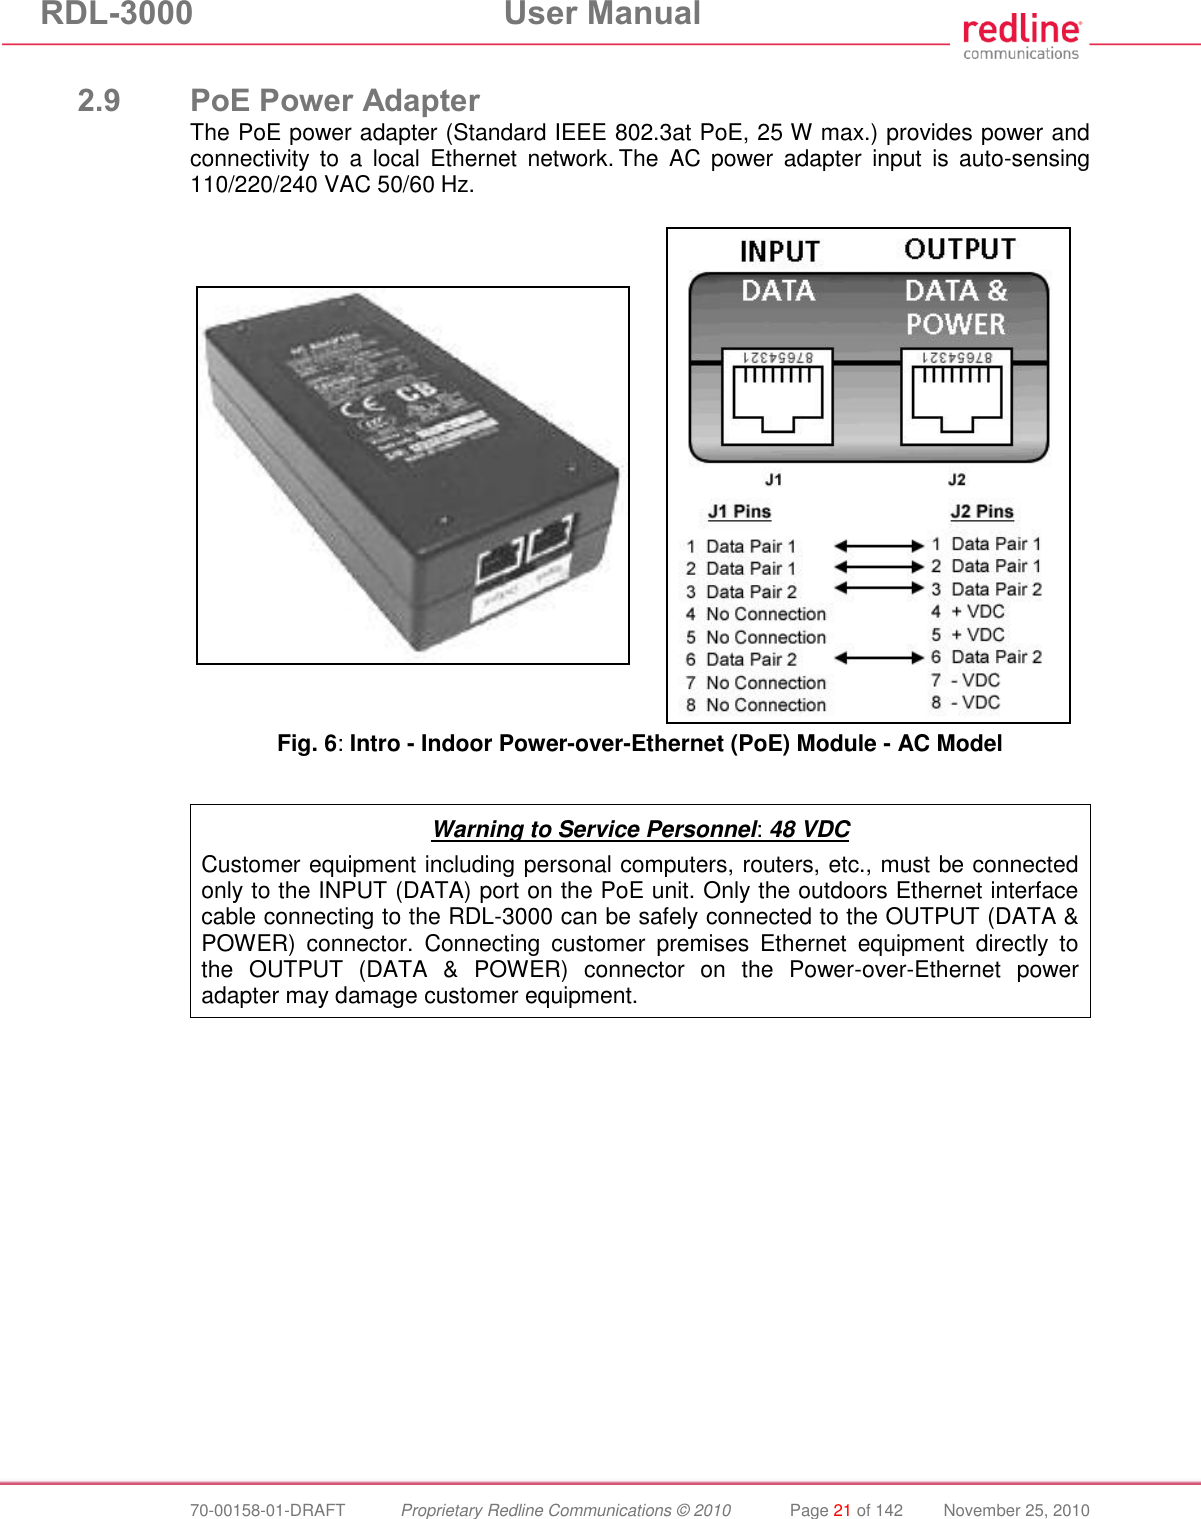 RDL-3000  User Manual  70-00158-01-DRAFT  Proprietary Redline Communications © 2010  Page 21 of 142  November 25, 2010  2.9 PoE Power Adapter The PoE power adapter (Standard IEEE 802.3at PoE, 25 W max.) provides power and connectivity  to  a  local  Ethernet  network. The  AC  power  adapter  input  is  auto-sensing 110/220/240 VAC 50/60 Hz.     Fig. 6: Intro - Indoor Power-over-Ethernet (PoE) Module - AC Model   Warning to Service Personnel: 48 VDC Customer equipment including personal computers, routers, etc., must be connected only to the INPUT (DATA) port on the PoE unit. Only the outdoors Ethernet interface cable connecting to the RDL-3000 can be safely connected to the OUTPUT (DATA &amp; POWER)  connector.  Connecting  customer  premises  Ethernet  equipment  directly  to the  OUTPUT  (DATA  &amp;  POWER)  connector  on  the  Power-over-Ethernet  power adapter may damage customer equipment.  